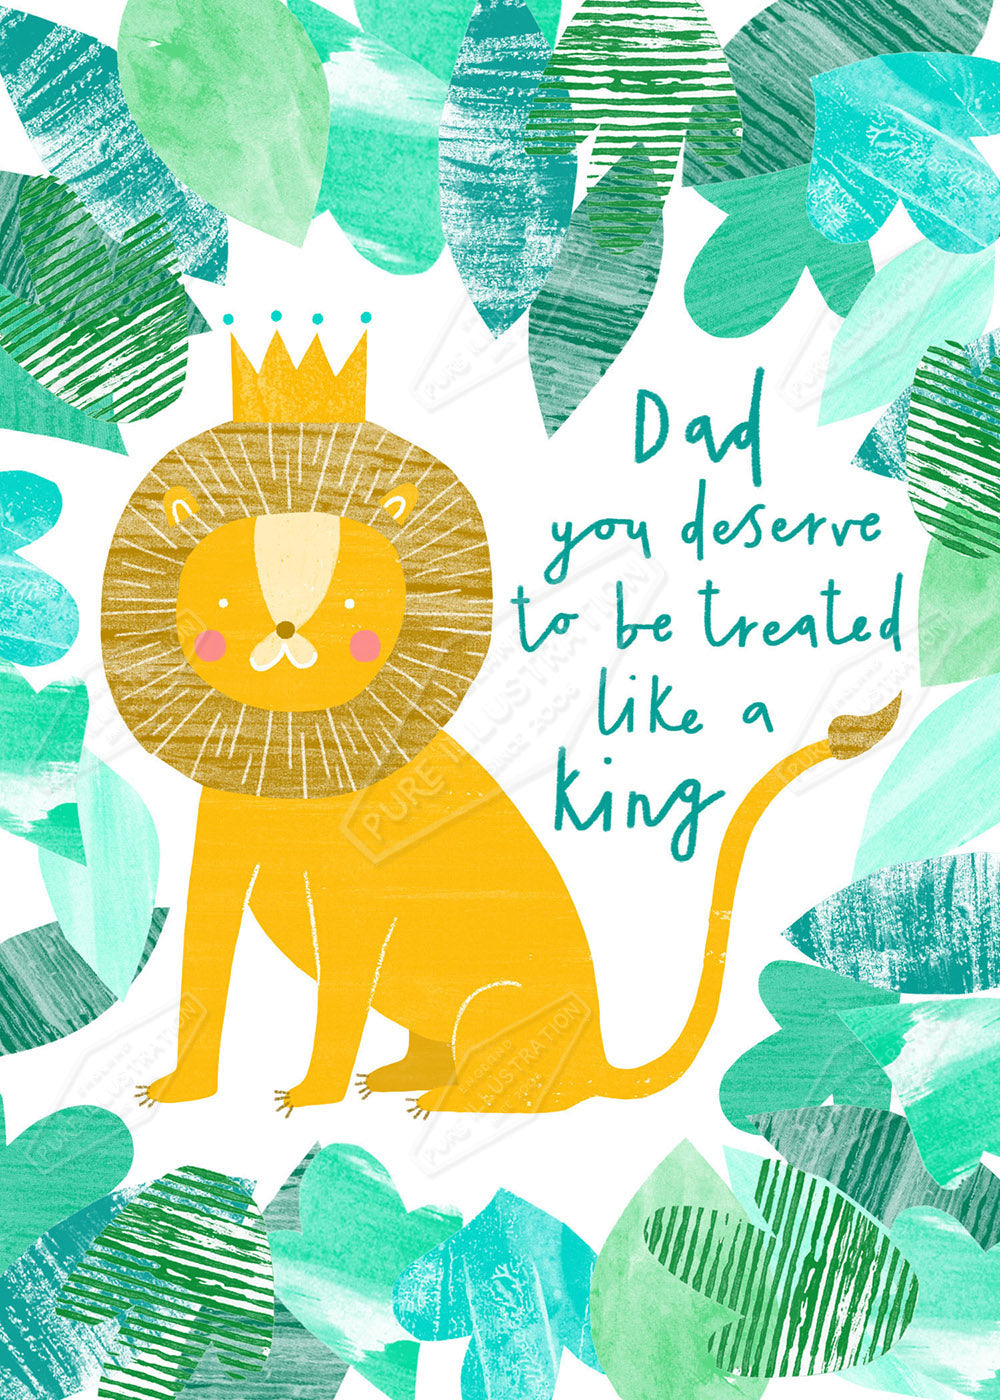 Dad Birthday / Father's Day Lion Greeting Card Design - by Leah Brideaux - Pure Art Licensing Agency & Surface Design Studio